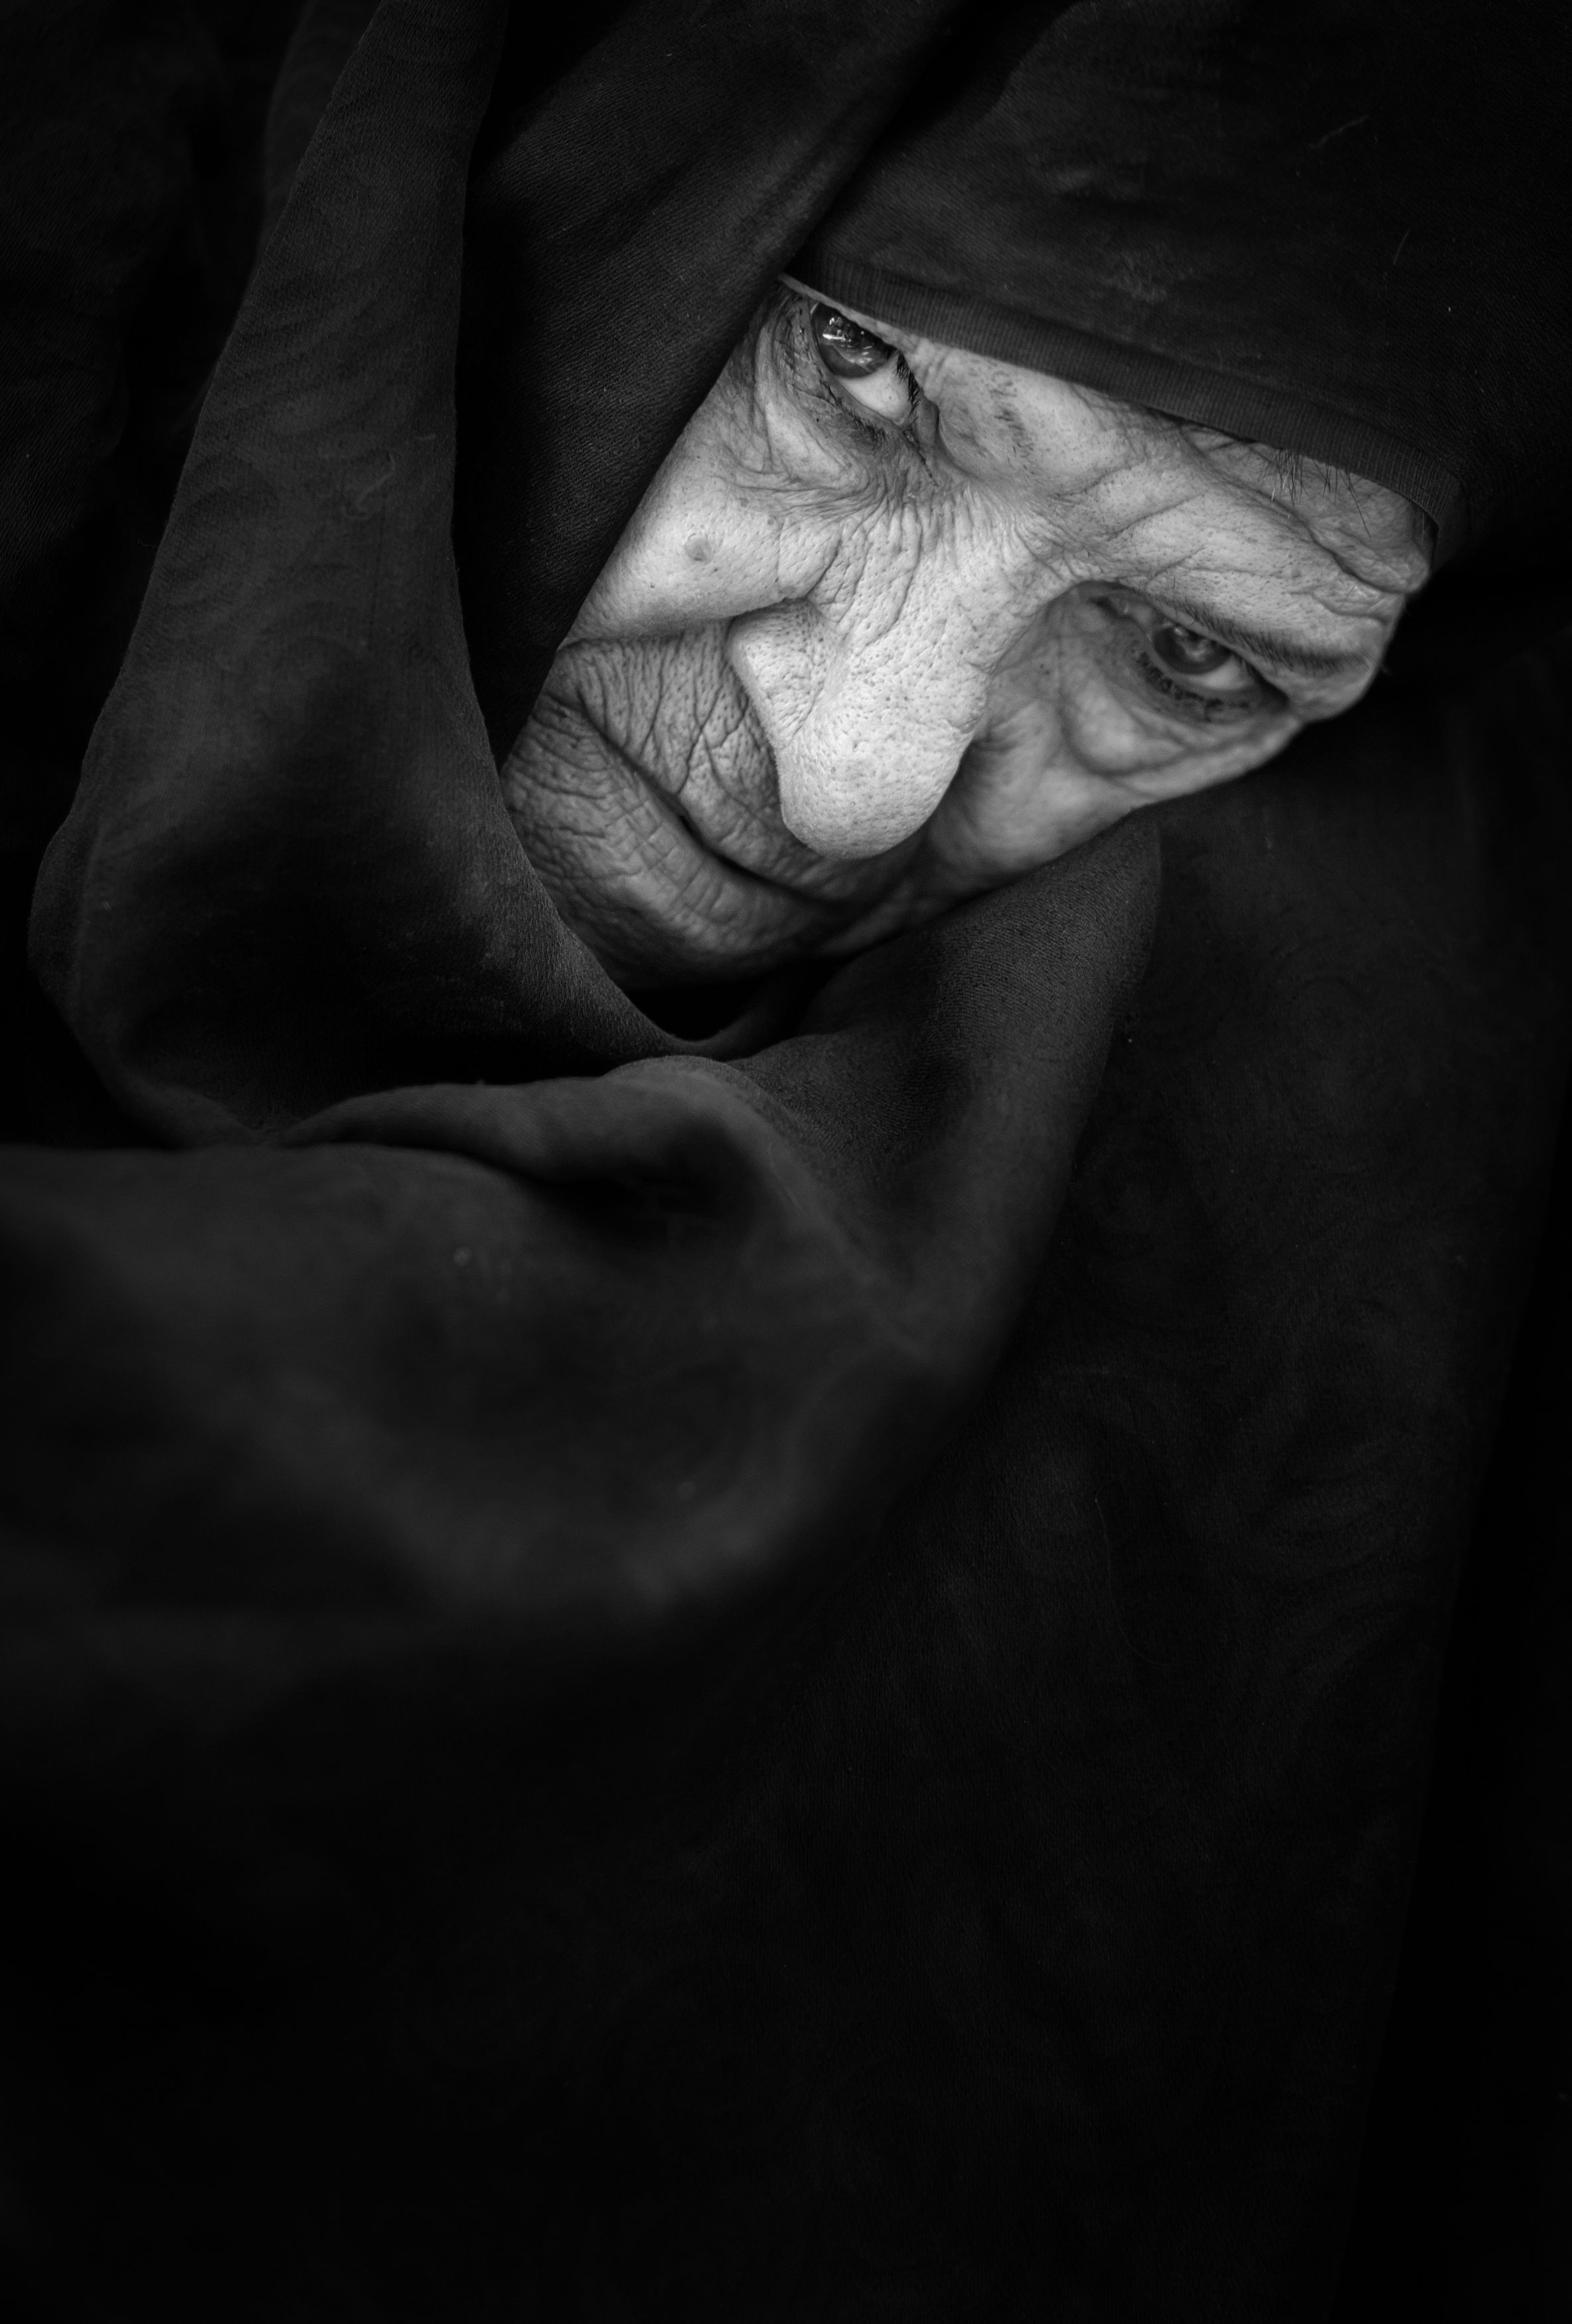 #portrait #homeless  #black and white #mother #grand mother, Nazari Hasan